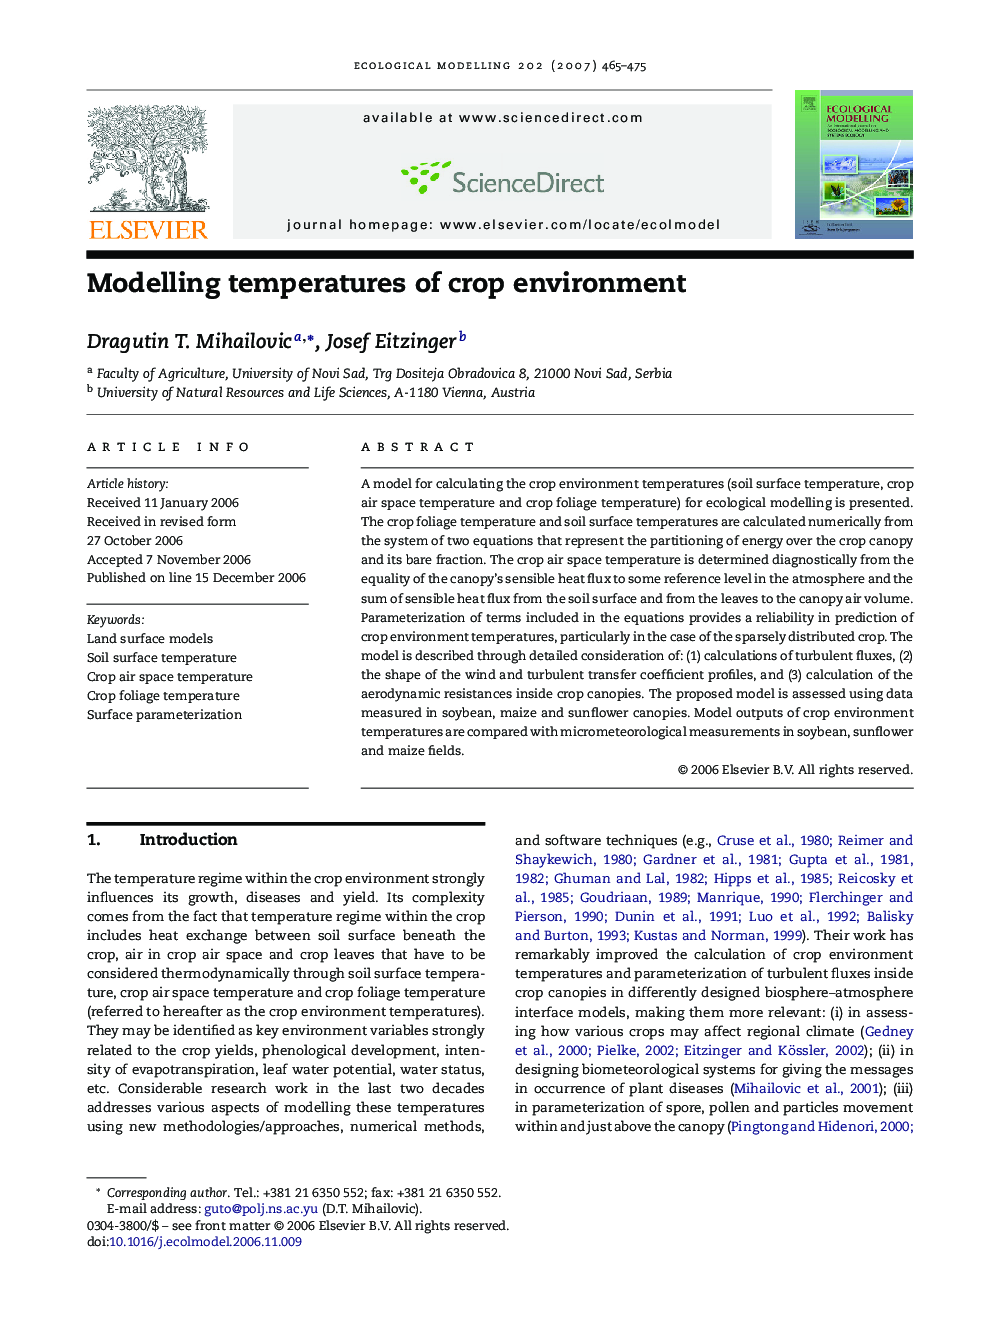 Modelling temperatures of crop environment